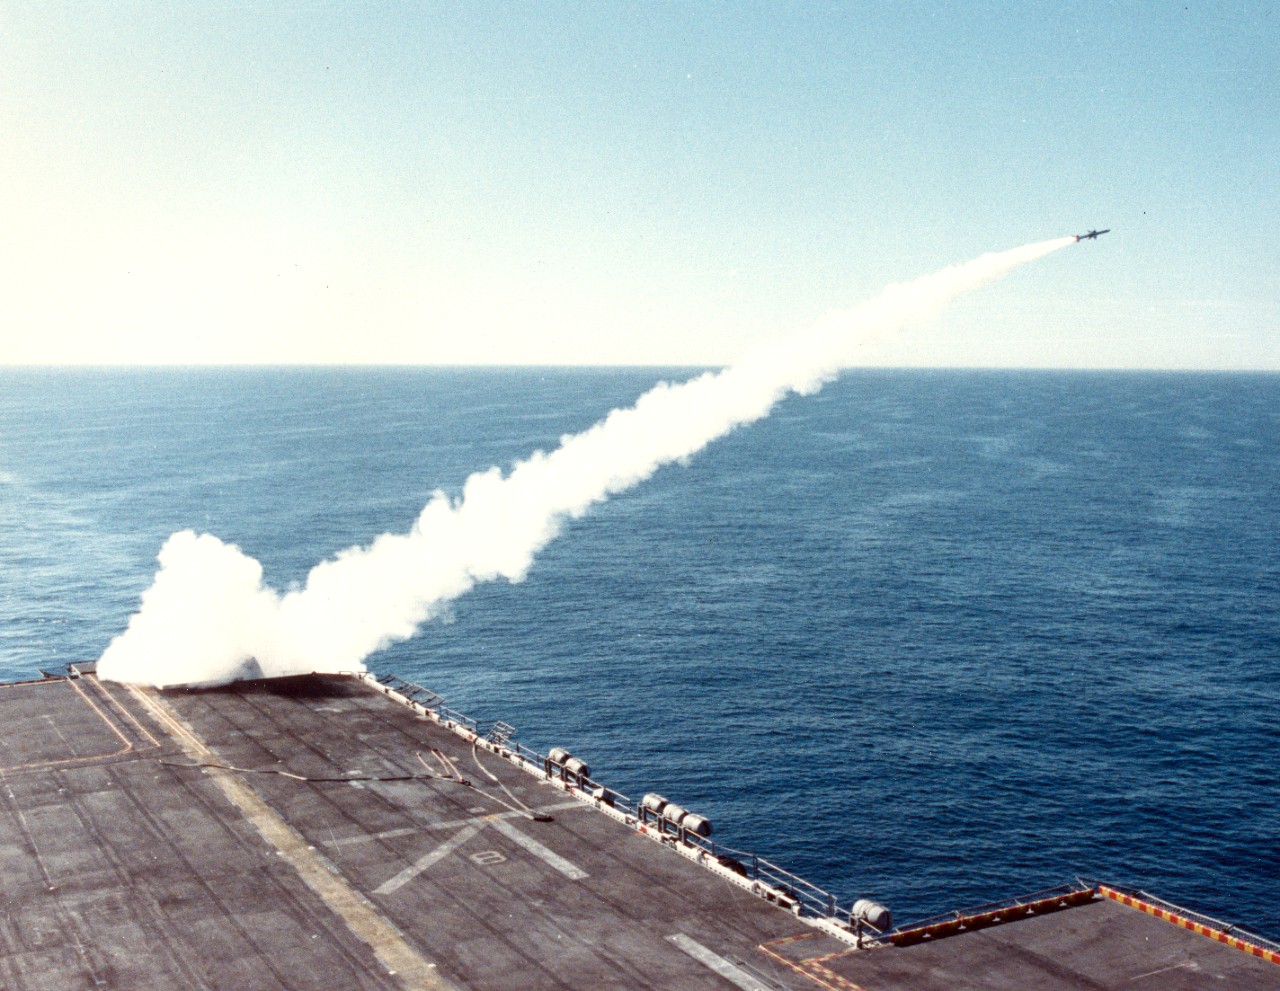 Pacific Ocean - A RIM-7 Sea Sparrow missile is launched from the amphibious assault ship USS Belleau Wood (LHA-3) while underway off the coast of Southern California. December 1988. 